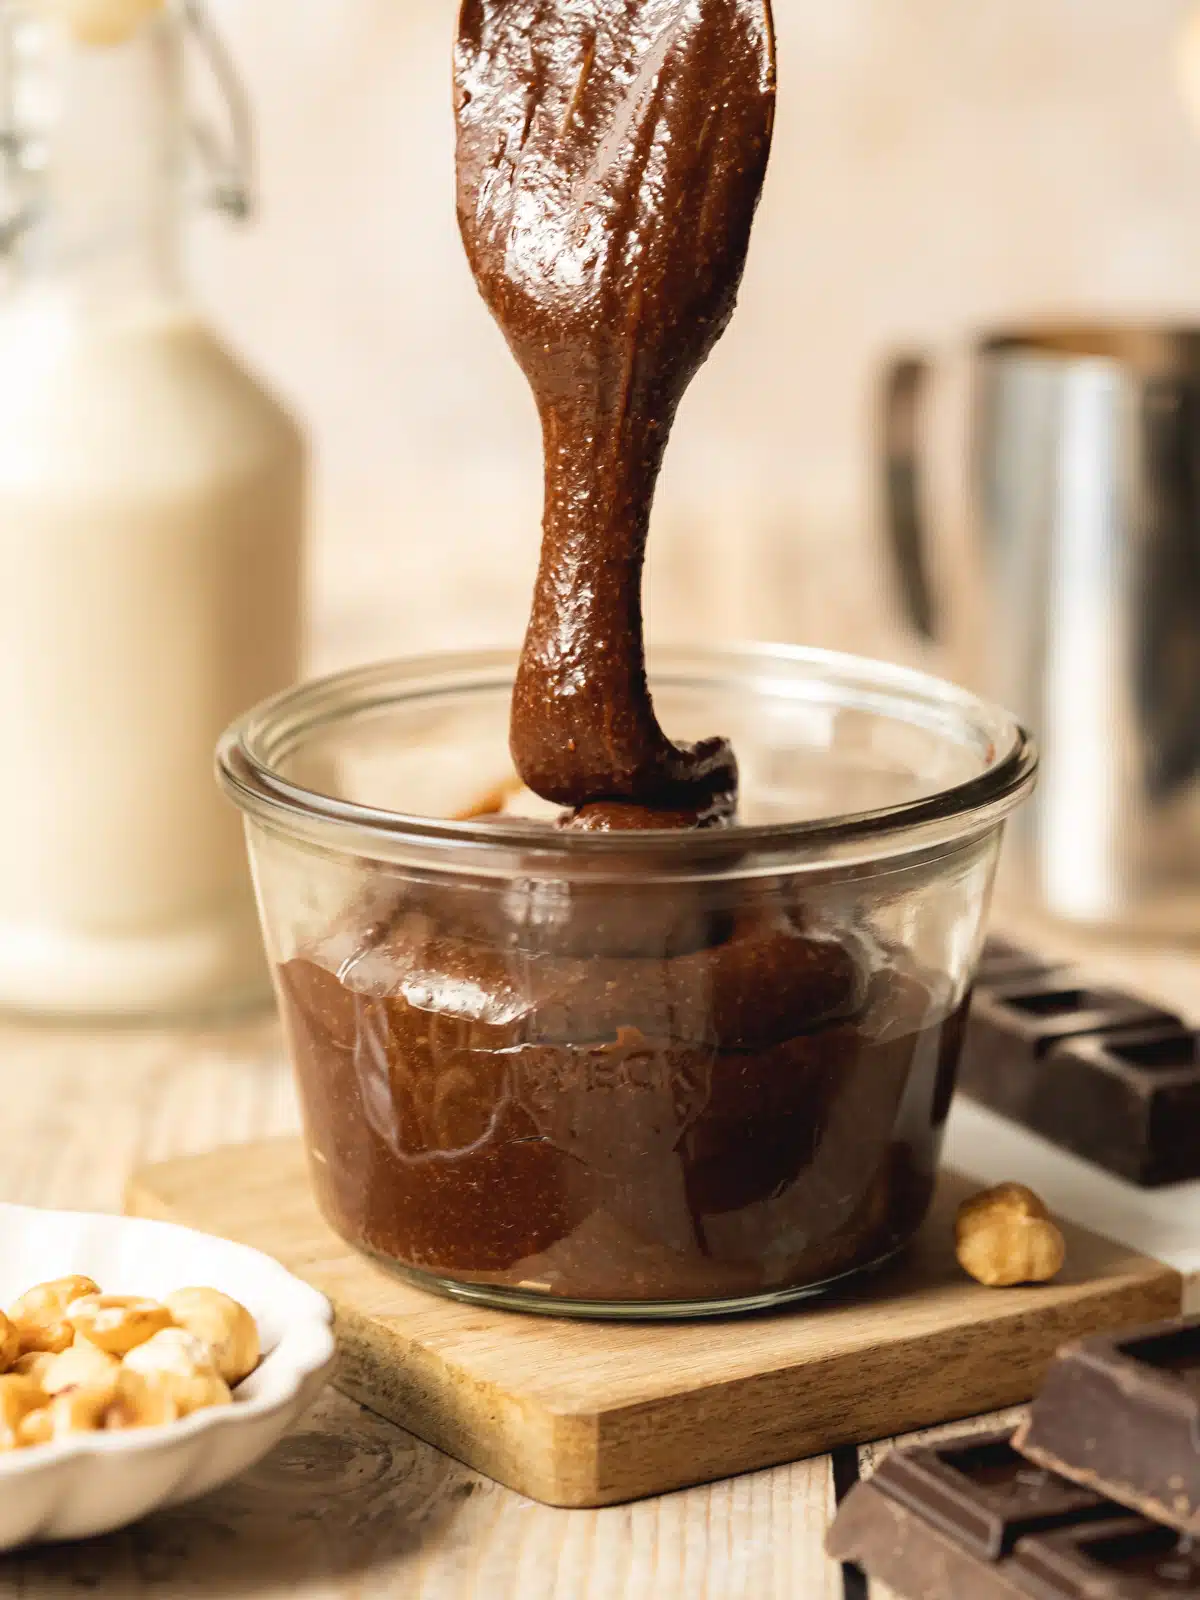 Action shot of warm homemade chocolate hazelnut spread (i.e. Nutella) being drizzled into a glass jar.